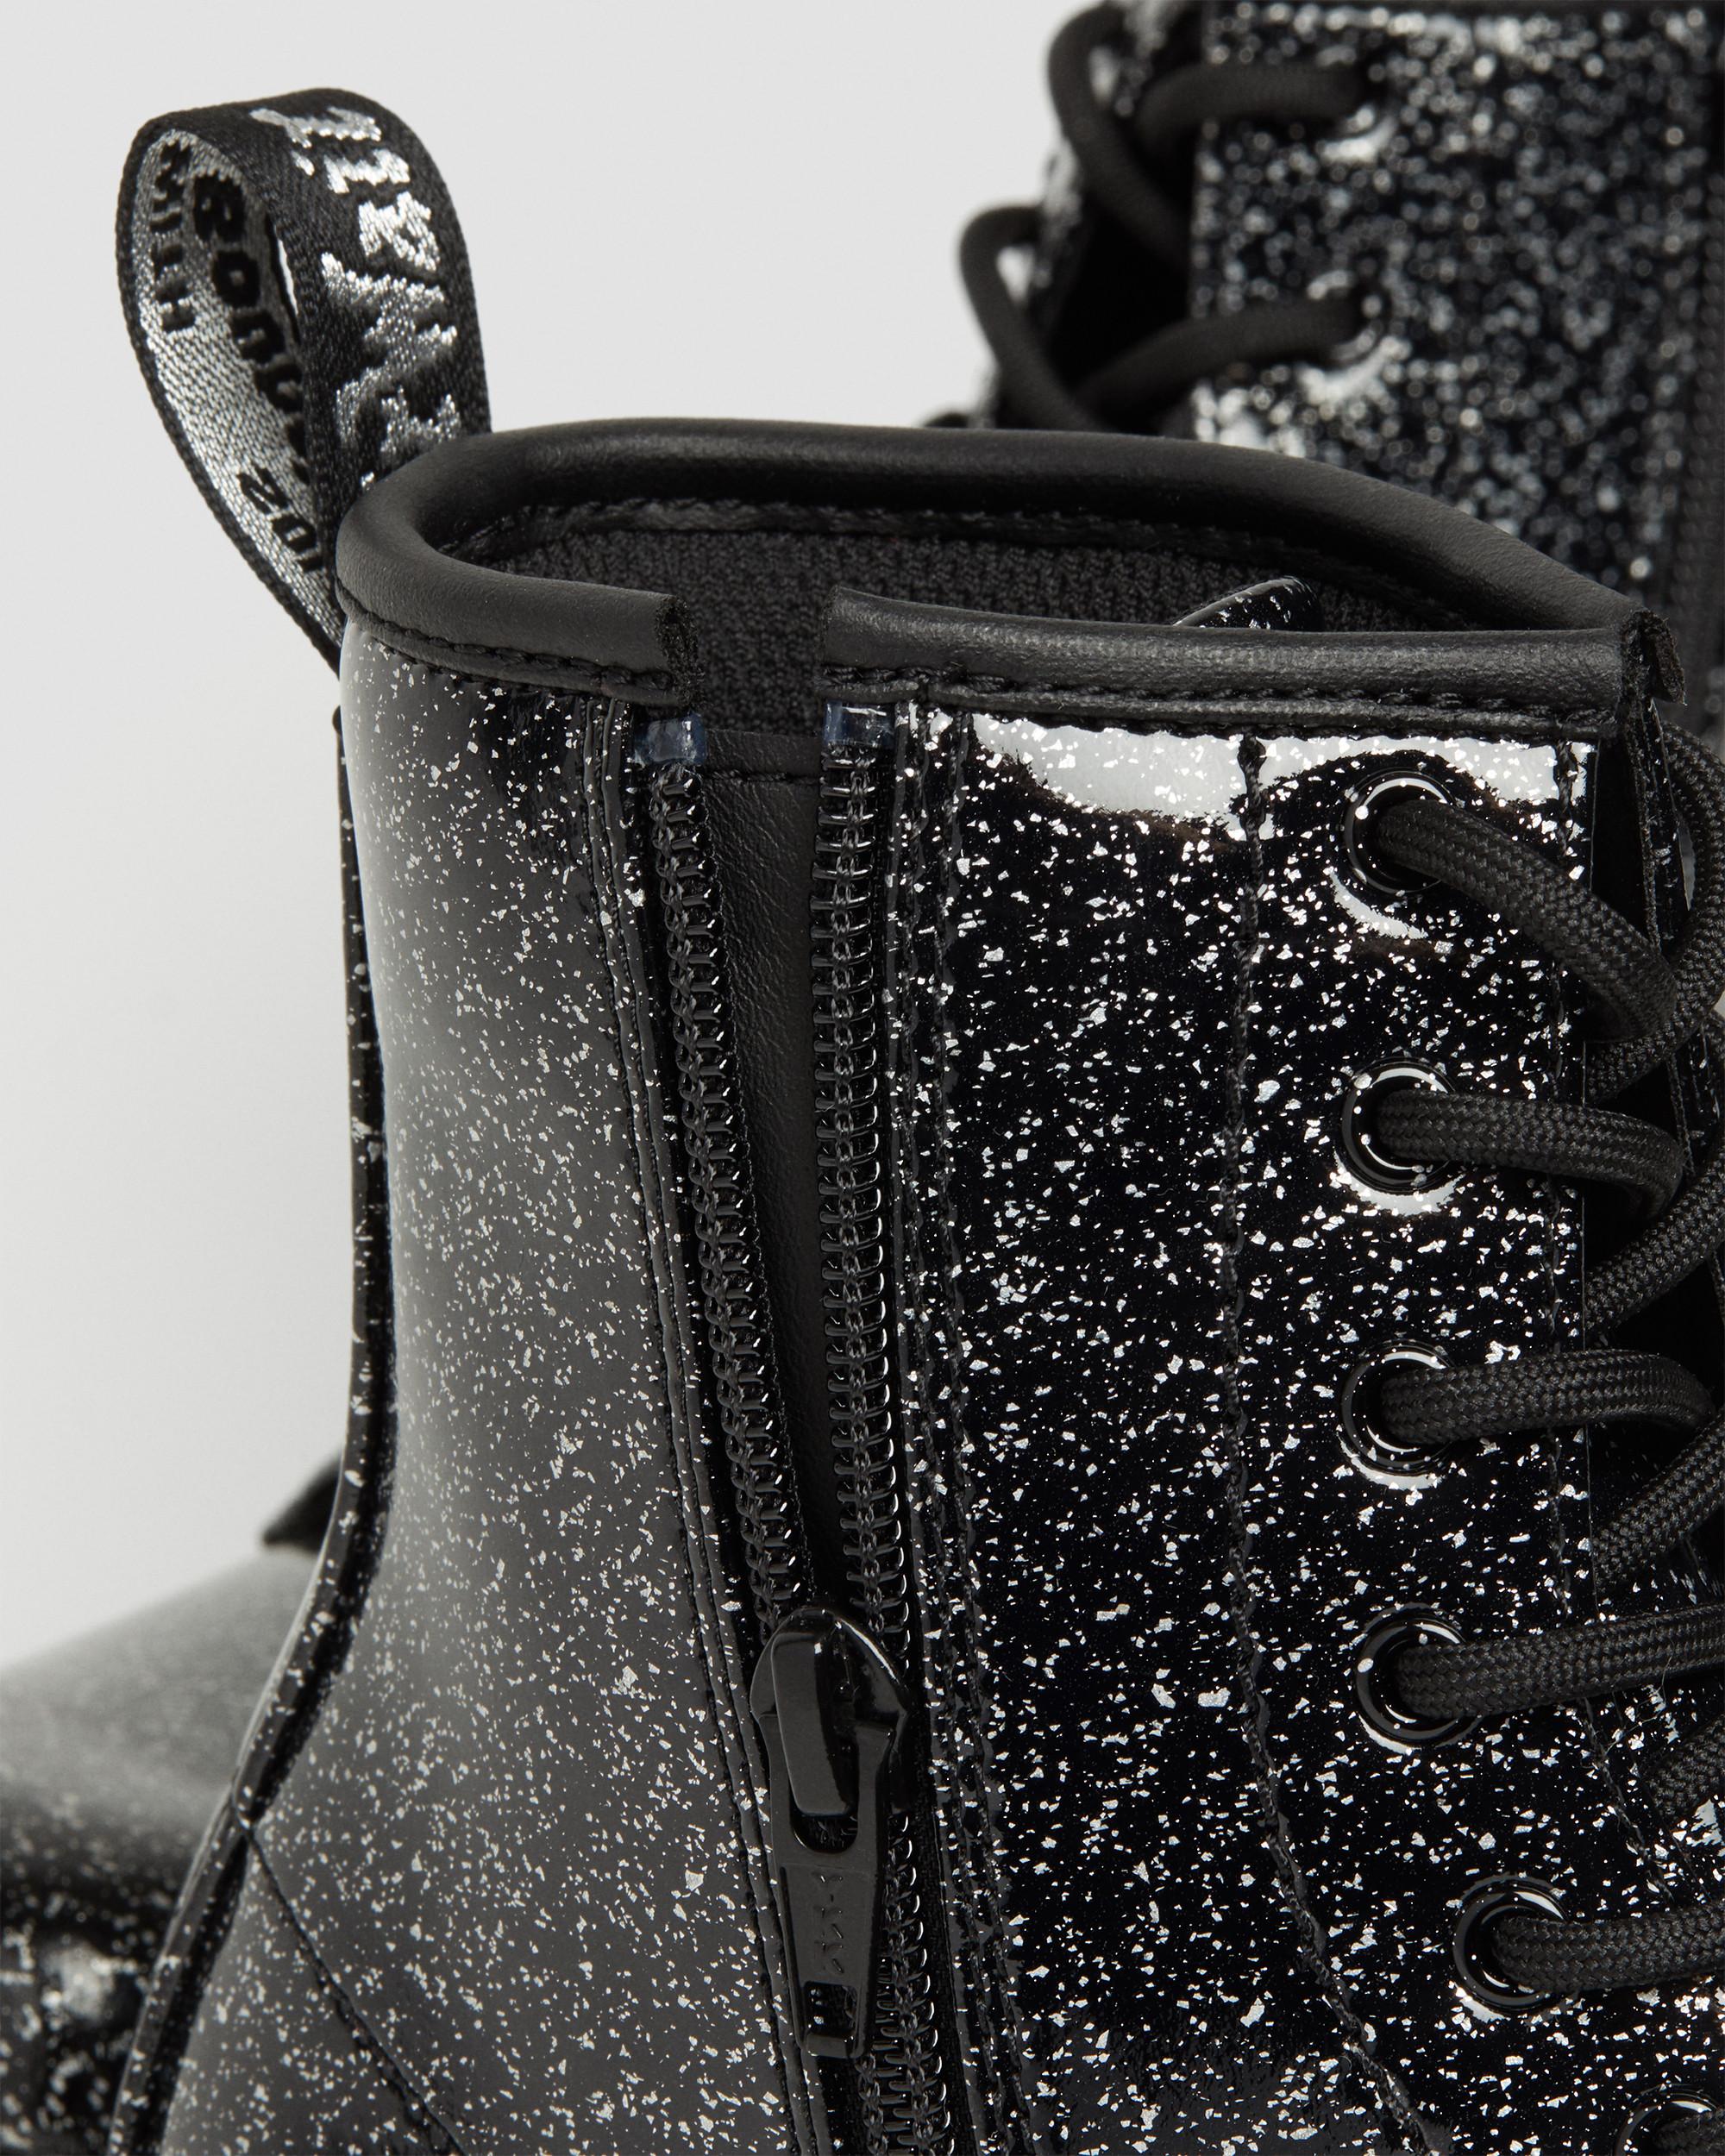 Youth 1460 Glitter Lace Up Boots in Black | Dr. Martens